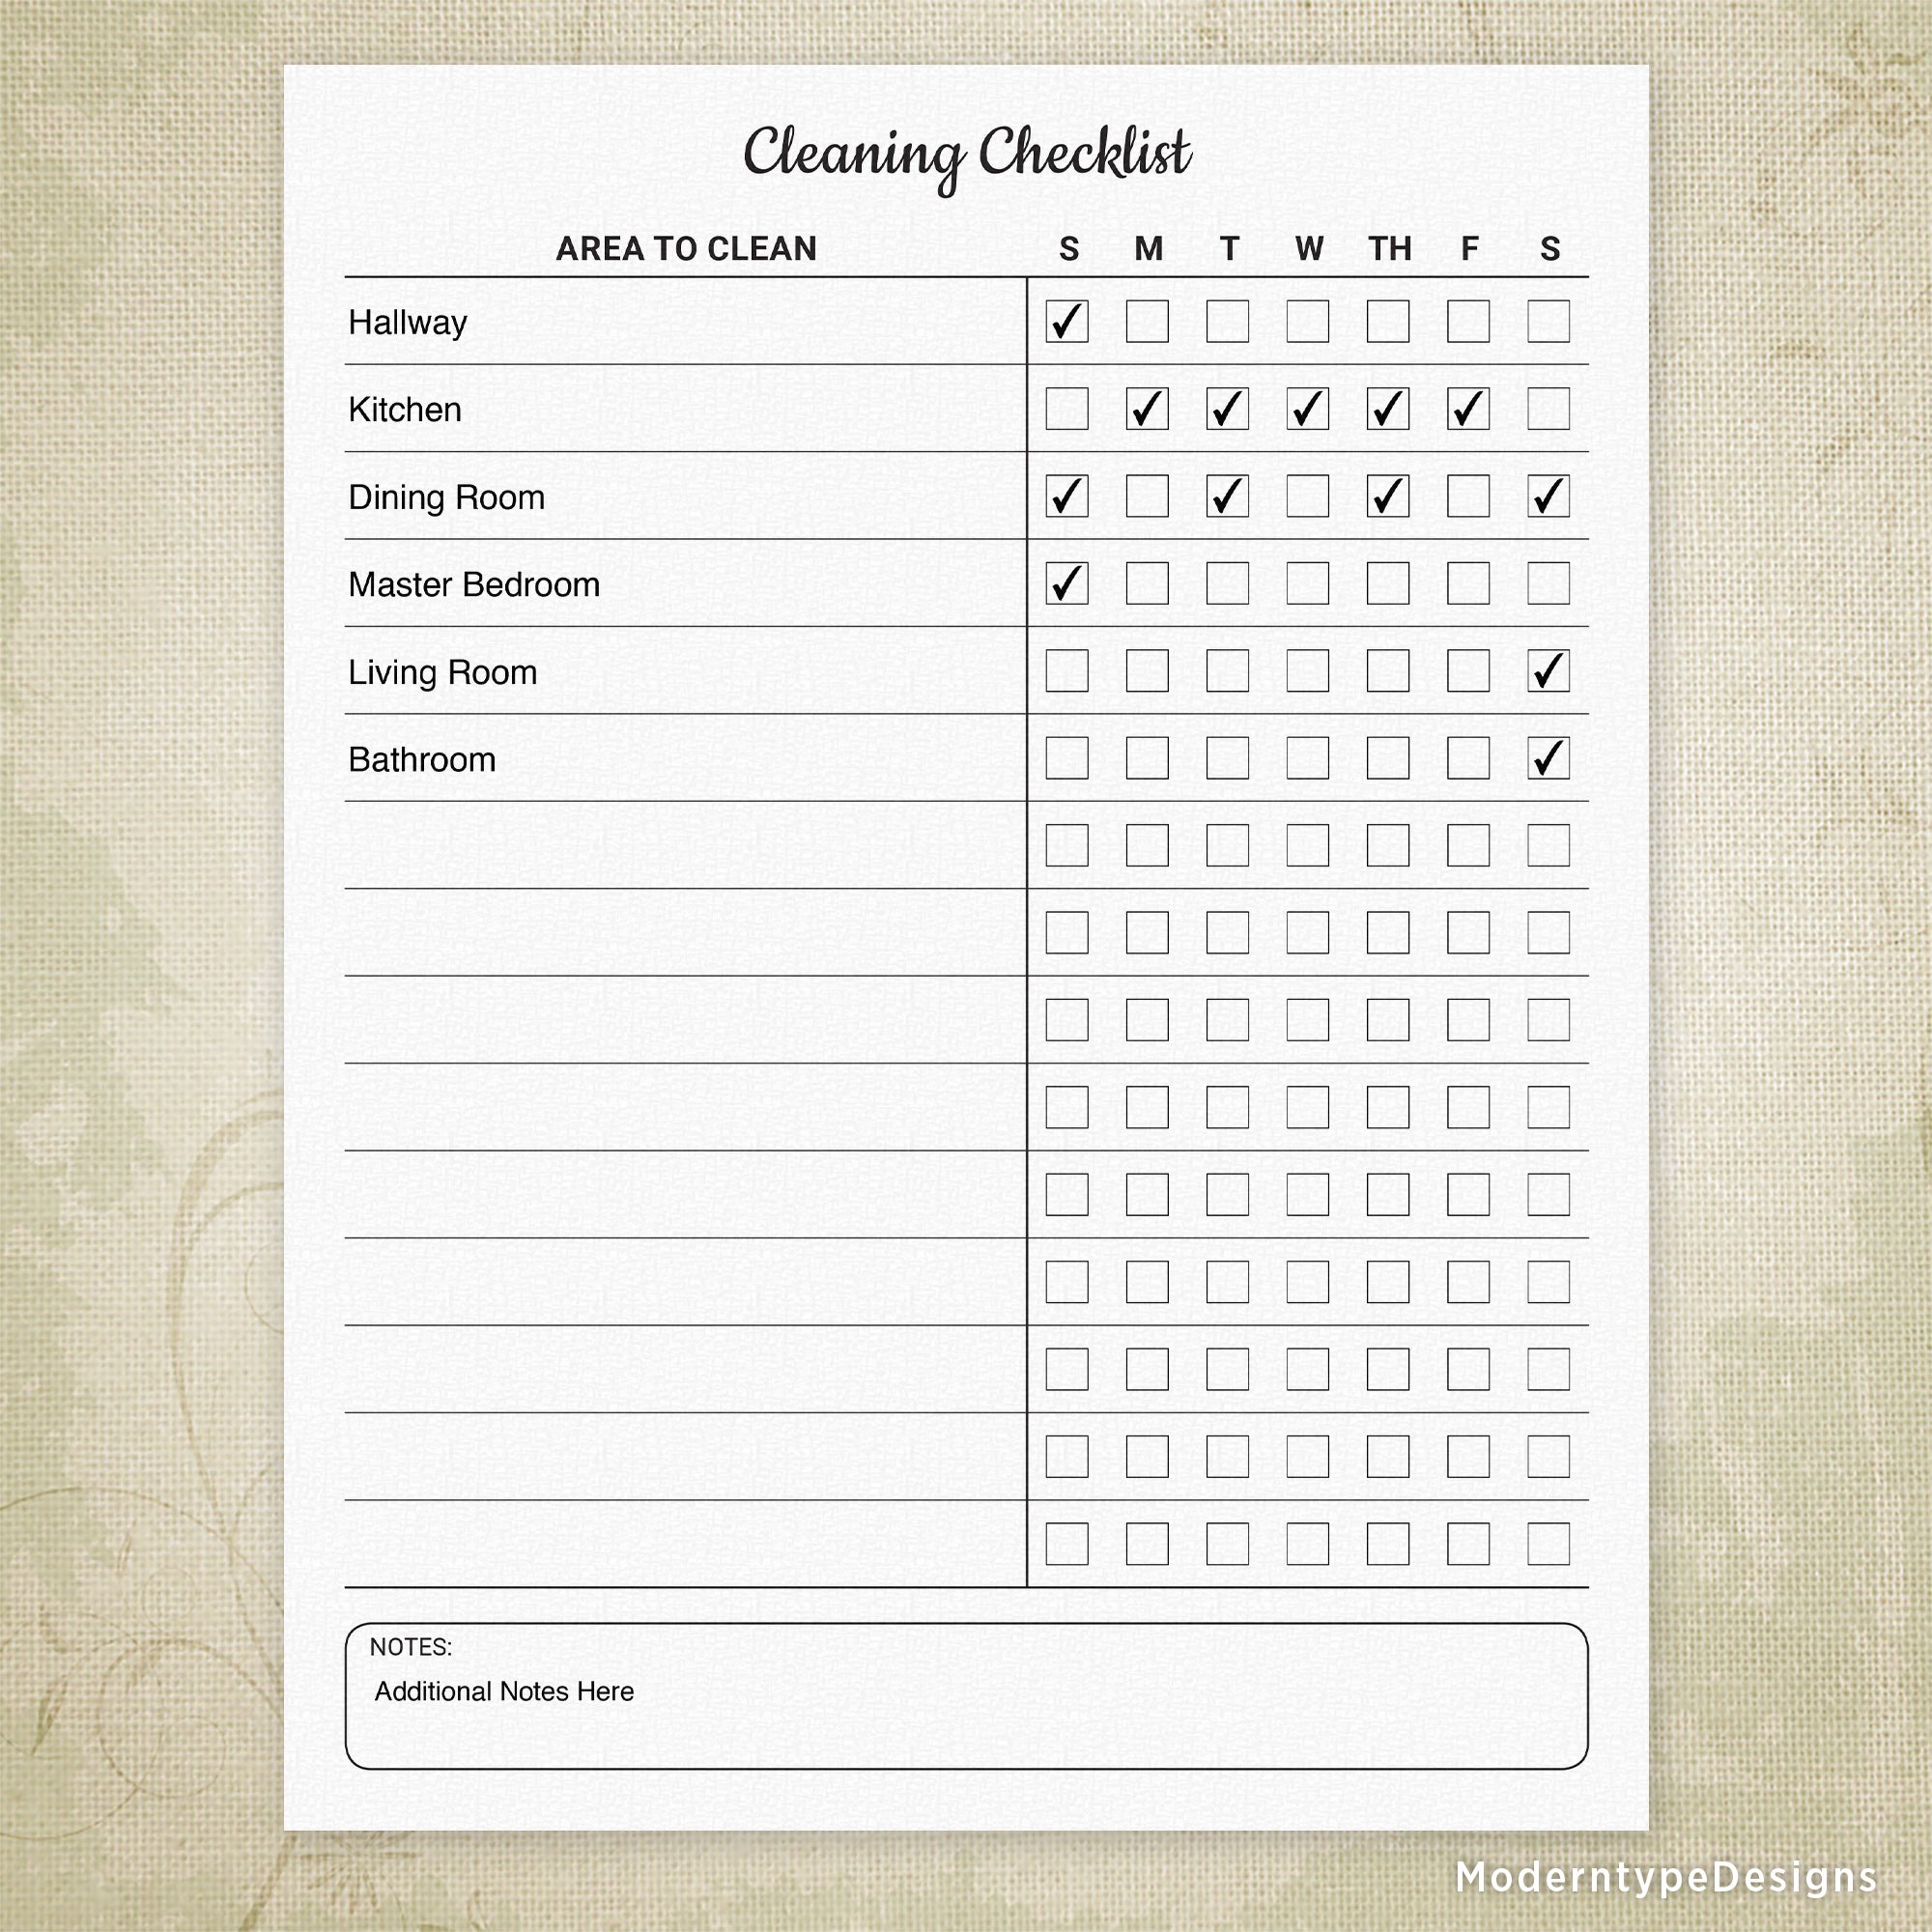 Cleaning Checklist Printable Form, Editable